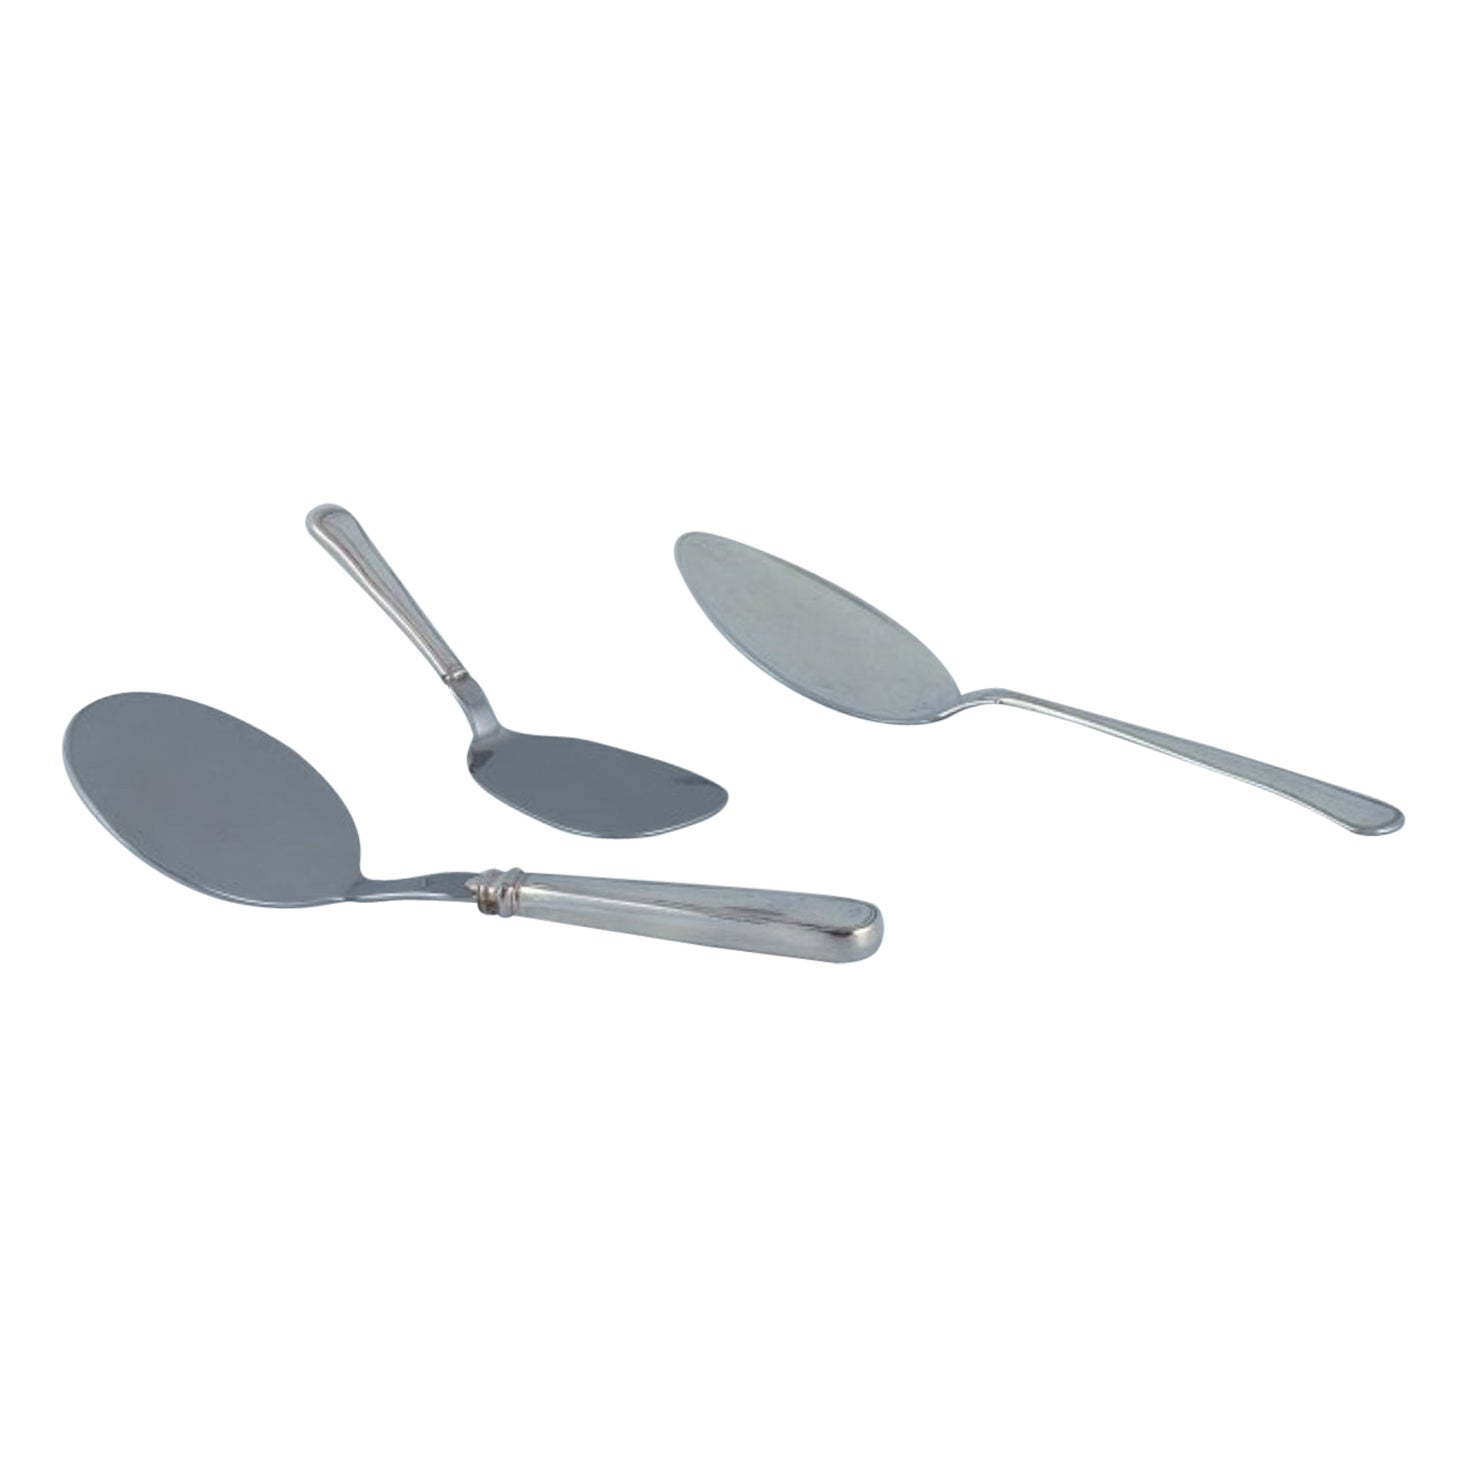 Cohr and other Danish silversmiths. Three "Old Danish" serving ladles For Sale